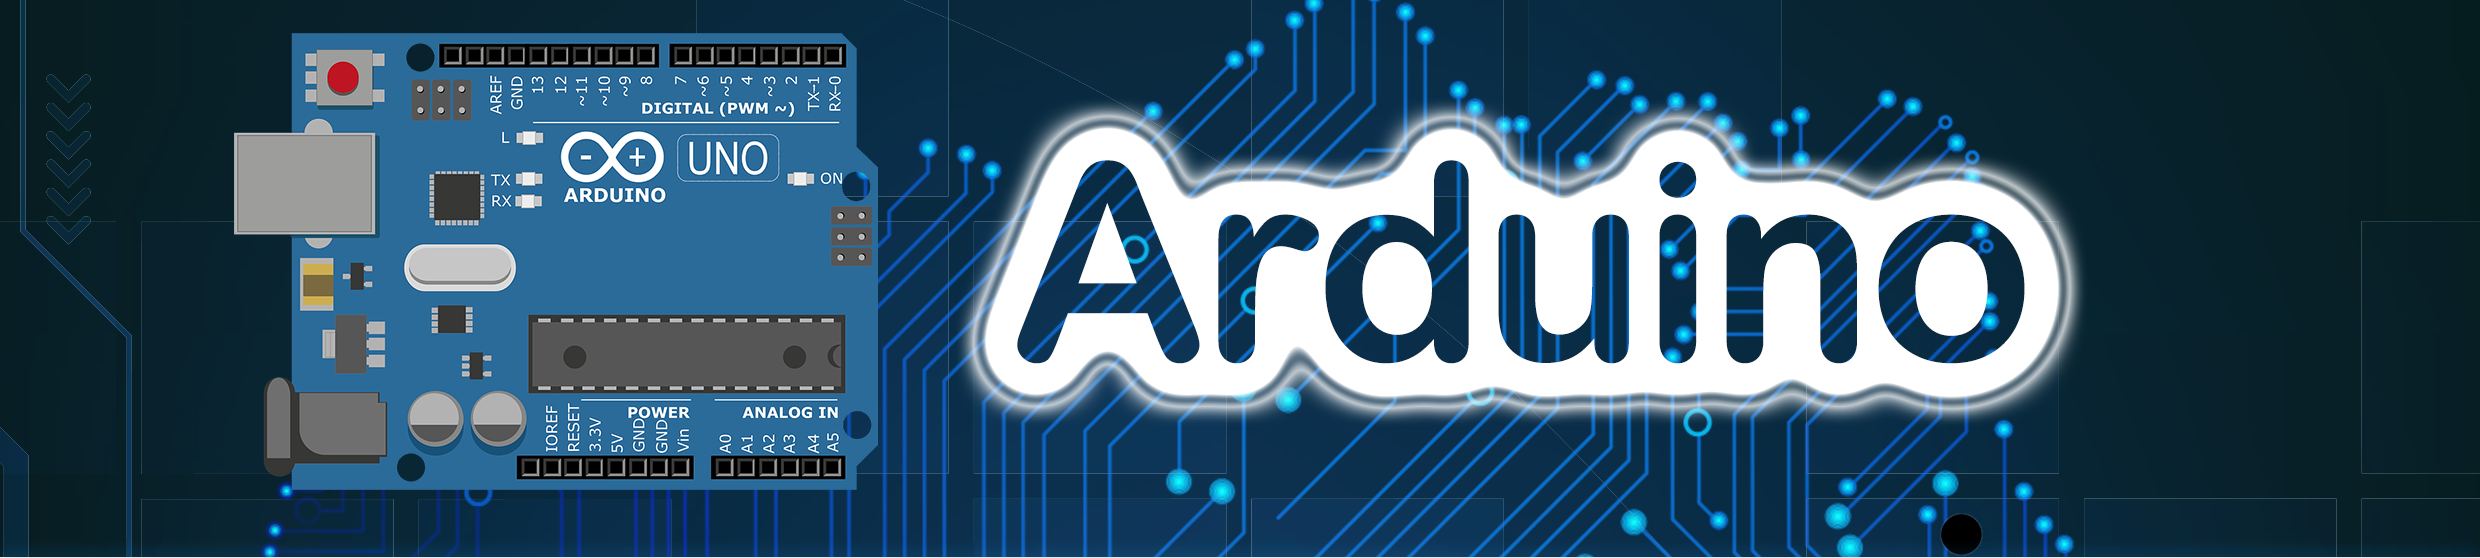 Arduino Banner 1.png (672 KB)